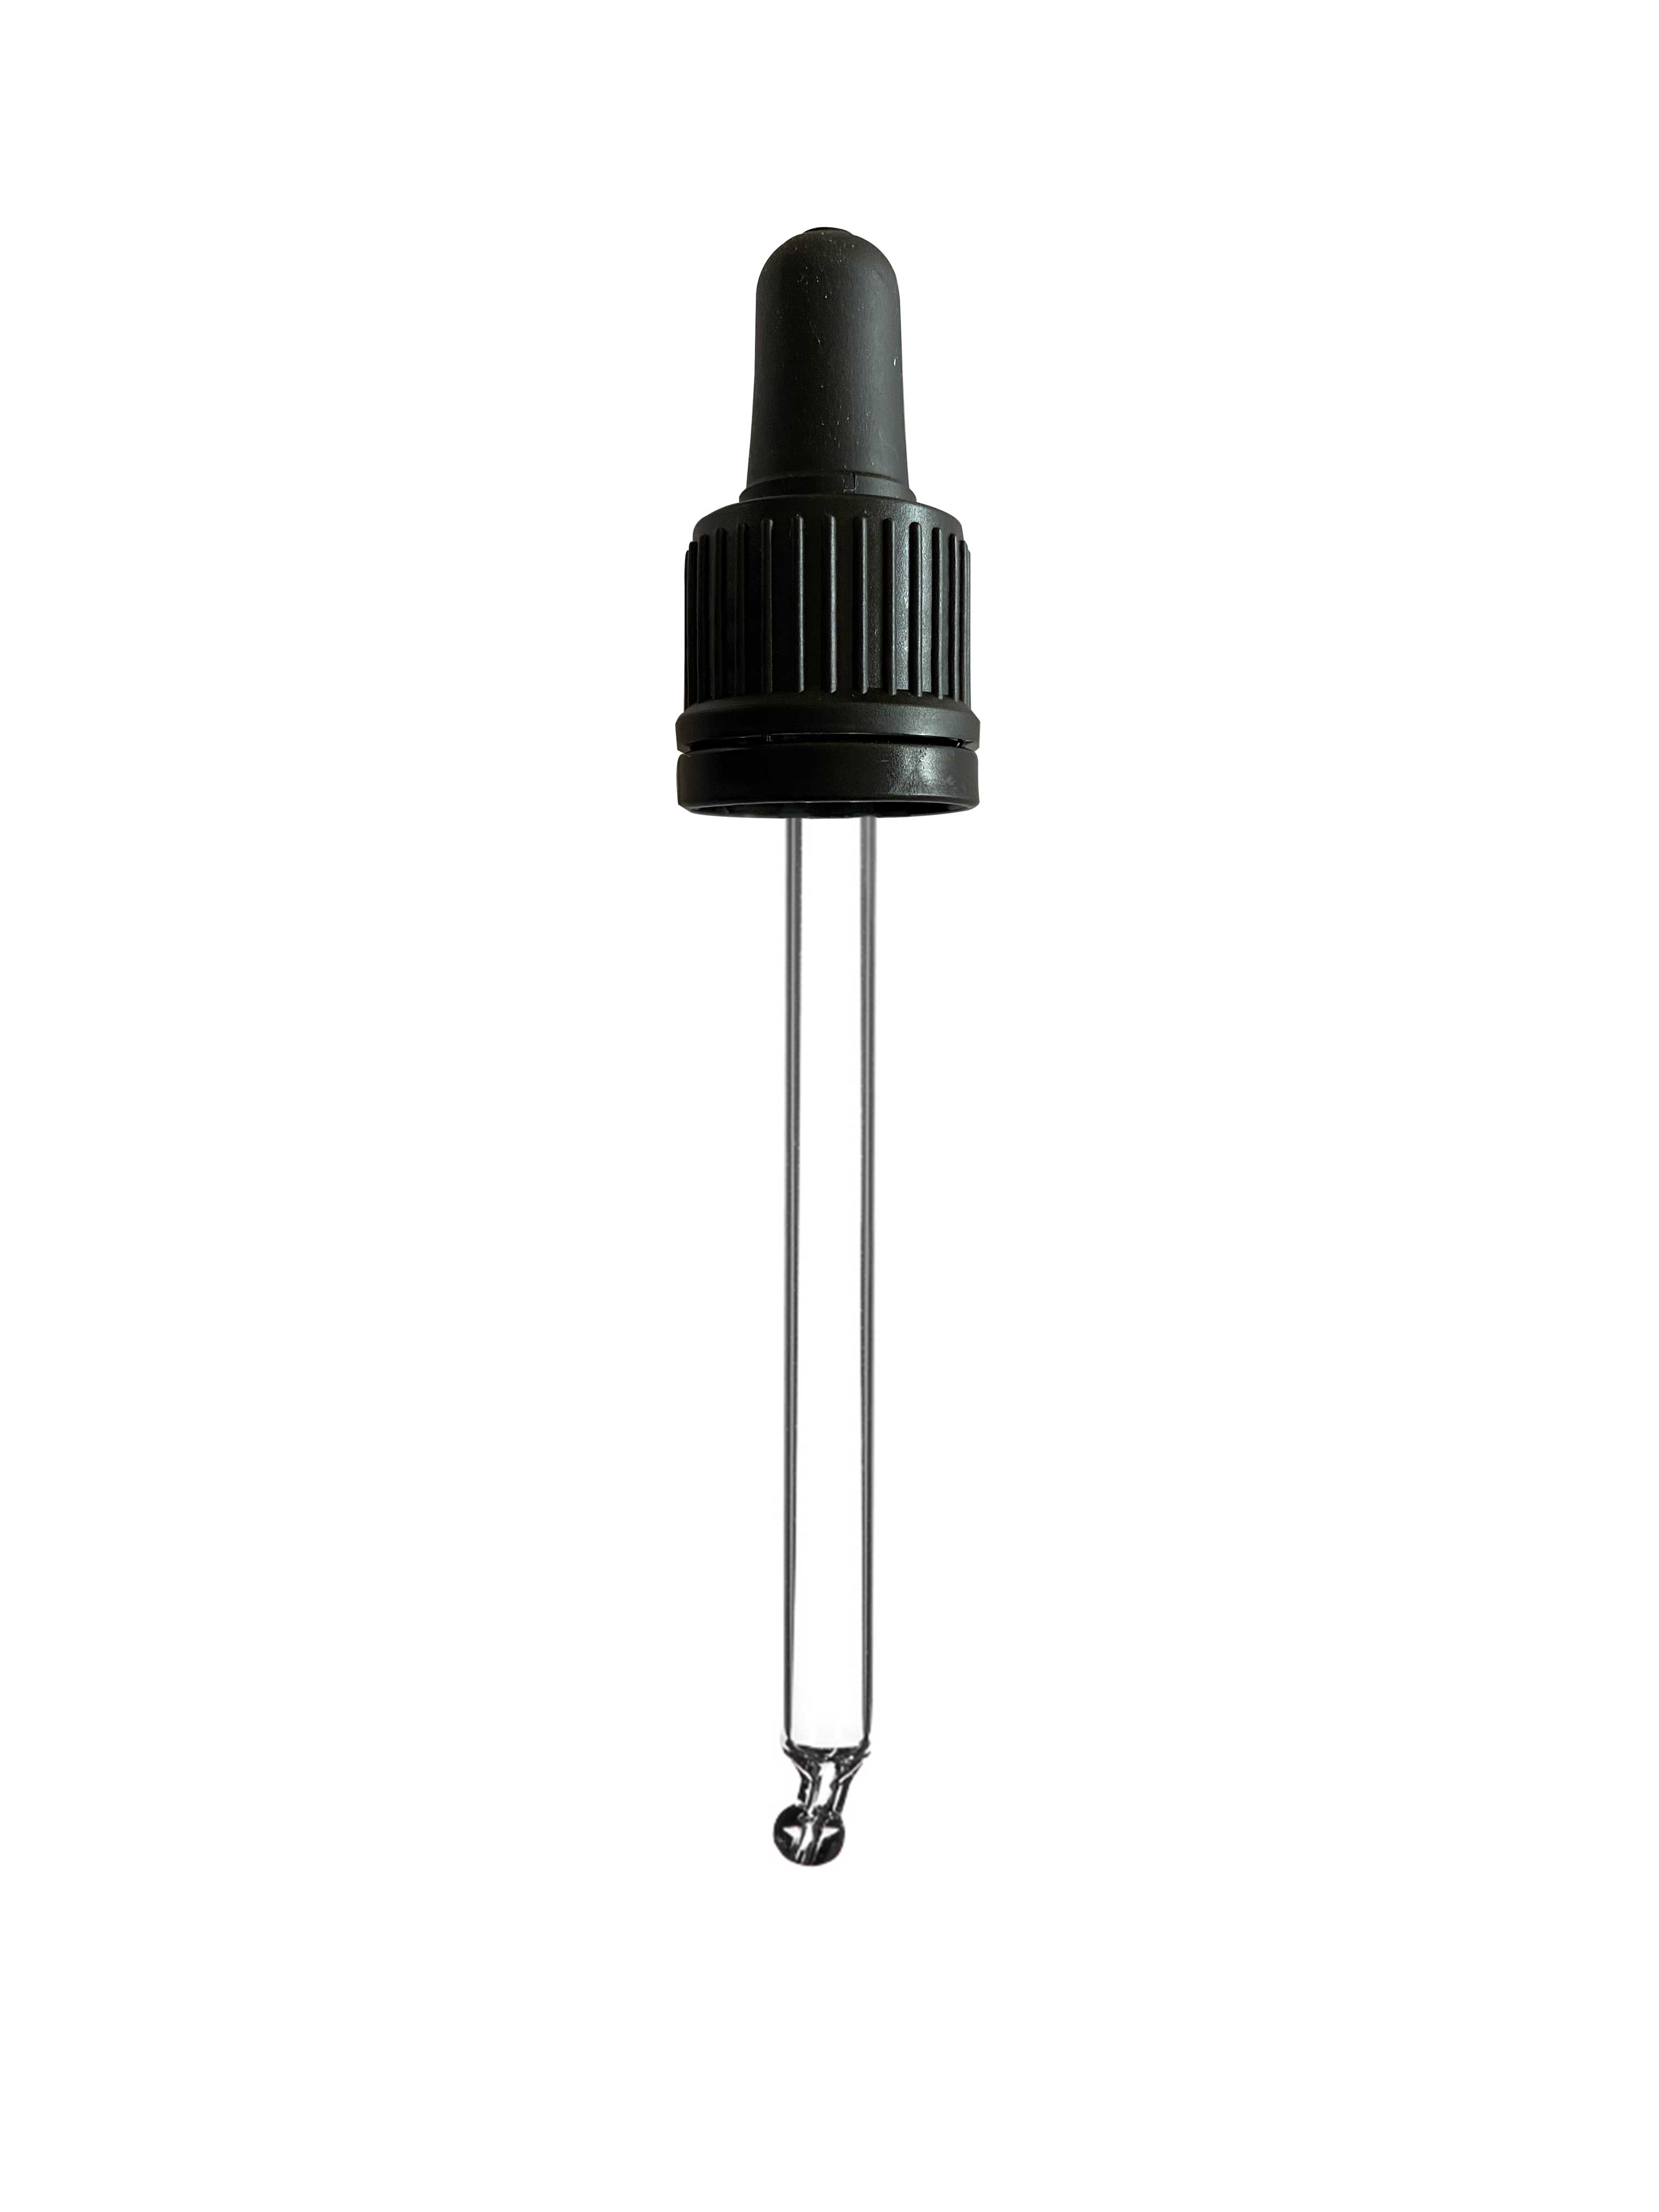 Pipette series II, DIN18, tamper-evident, PP, black, ribbed, black bulb TPE 0.7 ml, bent ball tip with 1.0 opening for Ginger 50 ml